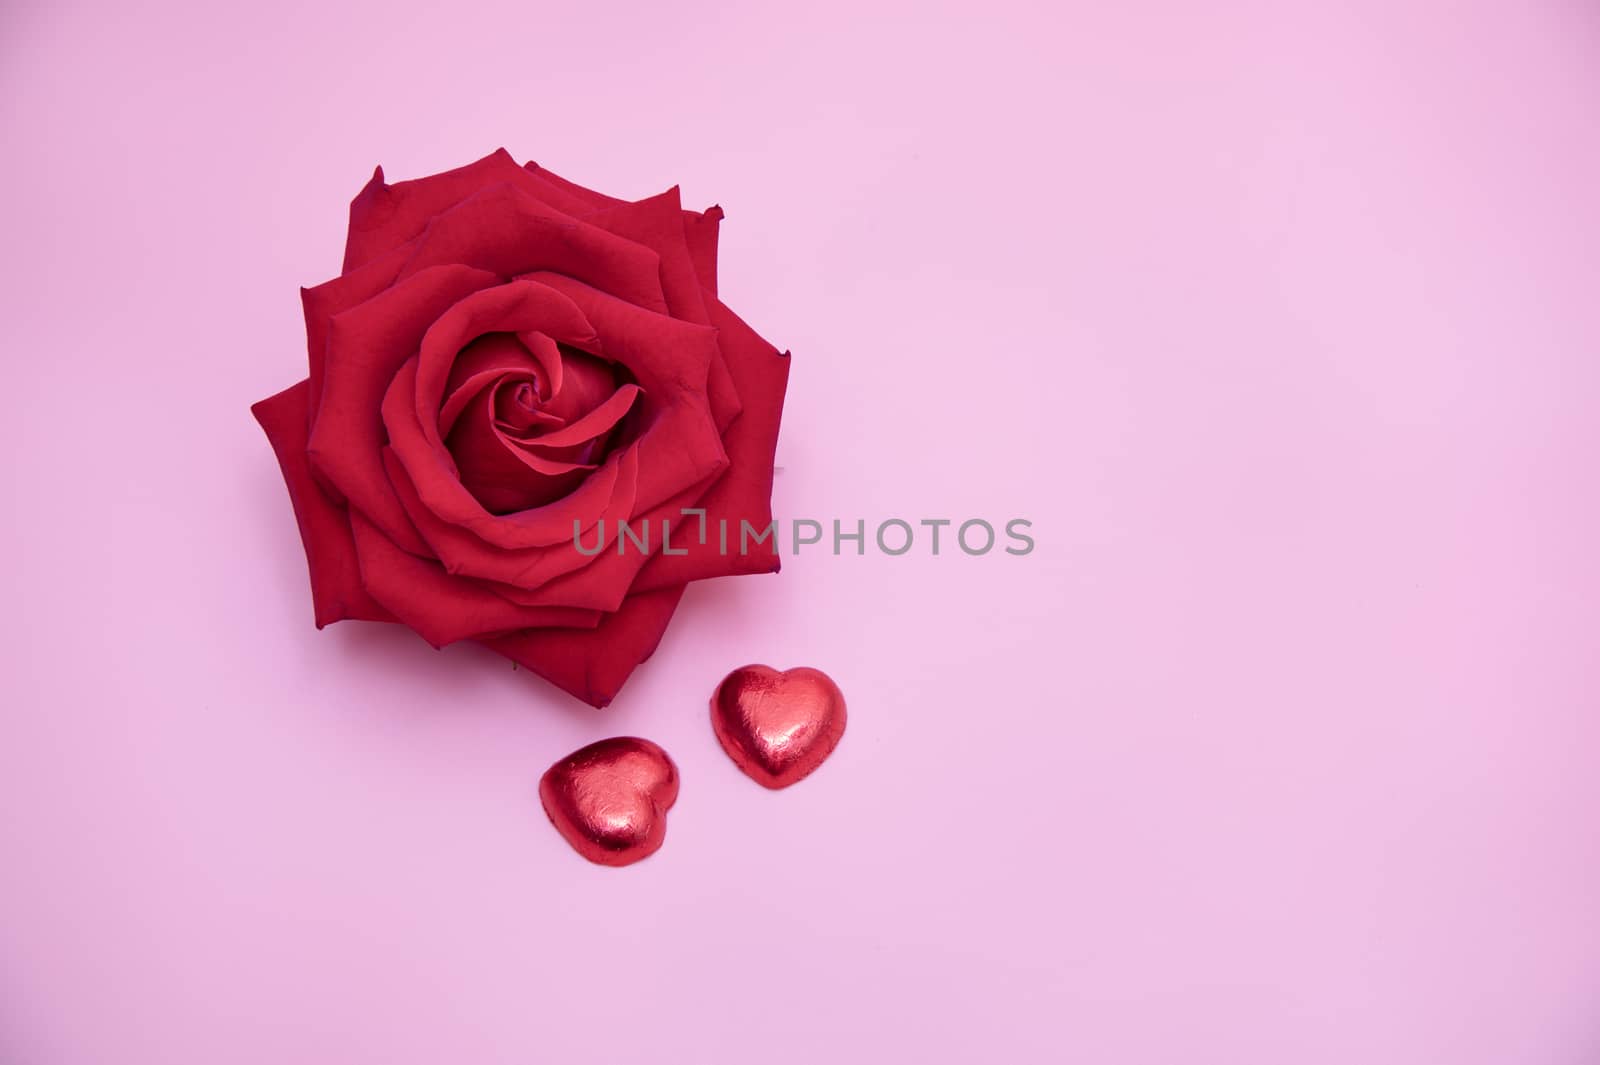 a red rose on pink background by Nawoot